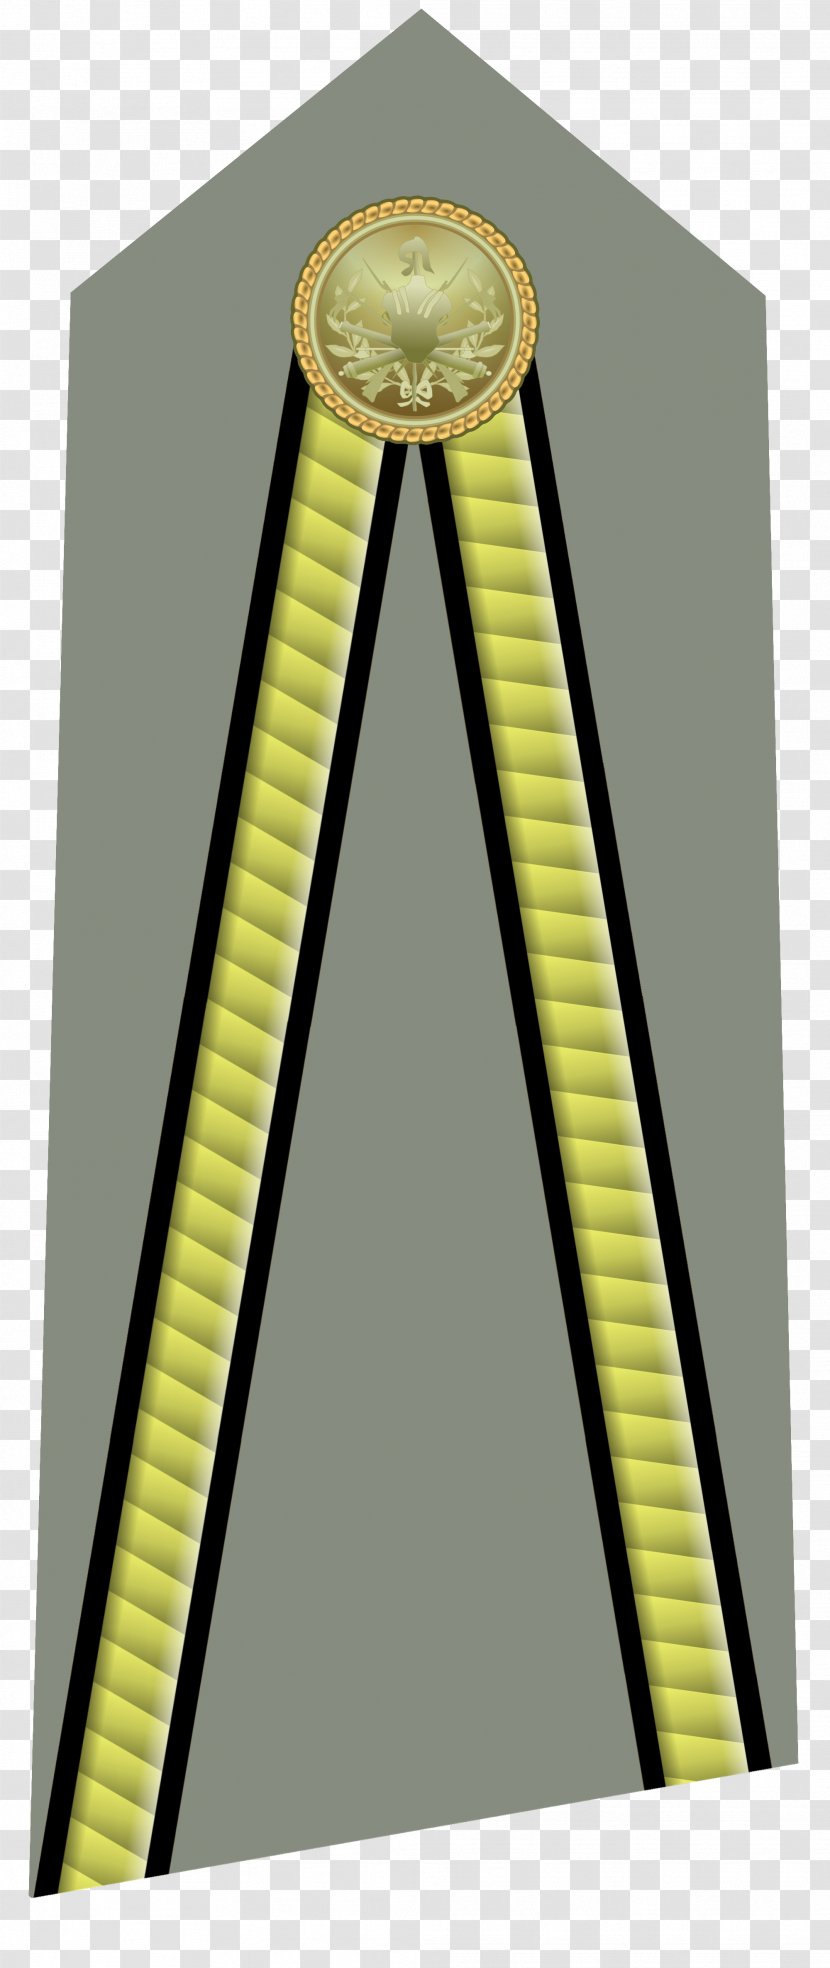 Line Triangle - Yellow Transparent PNG